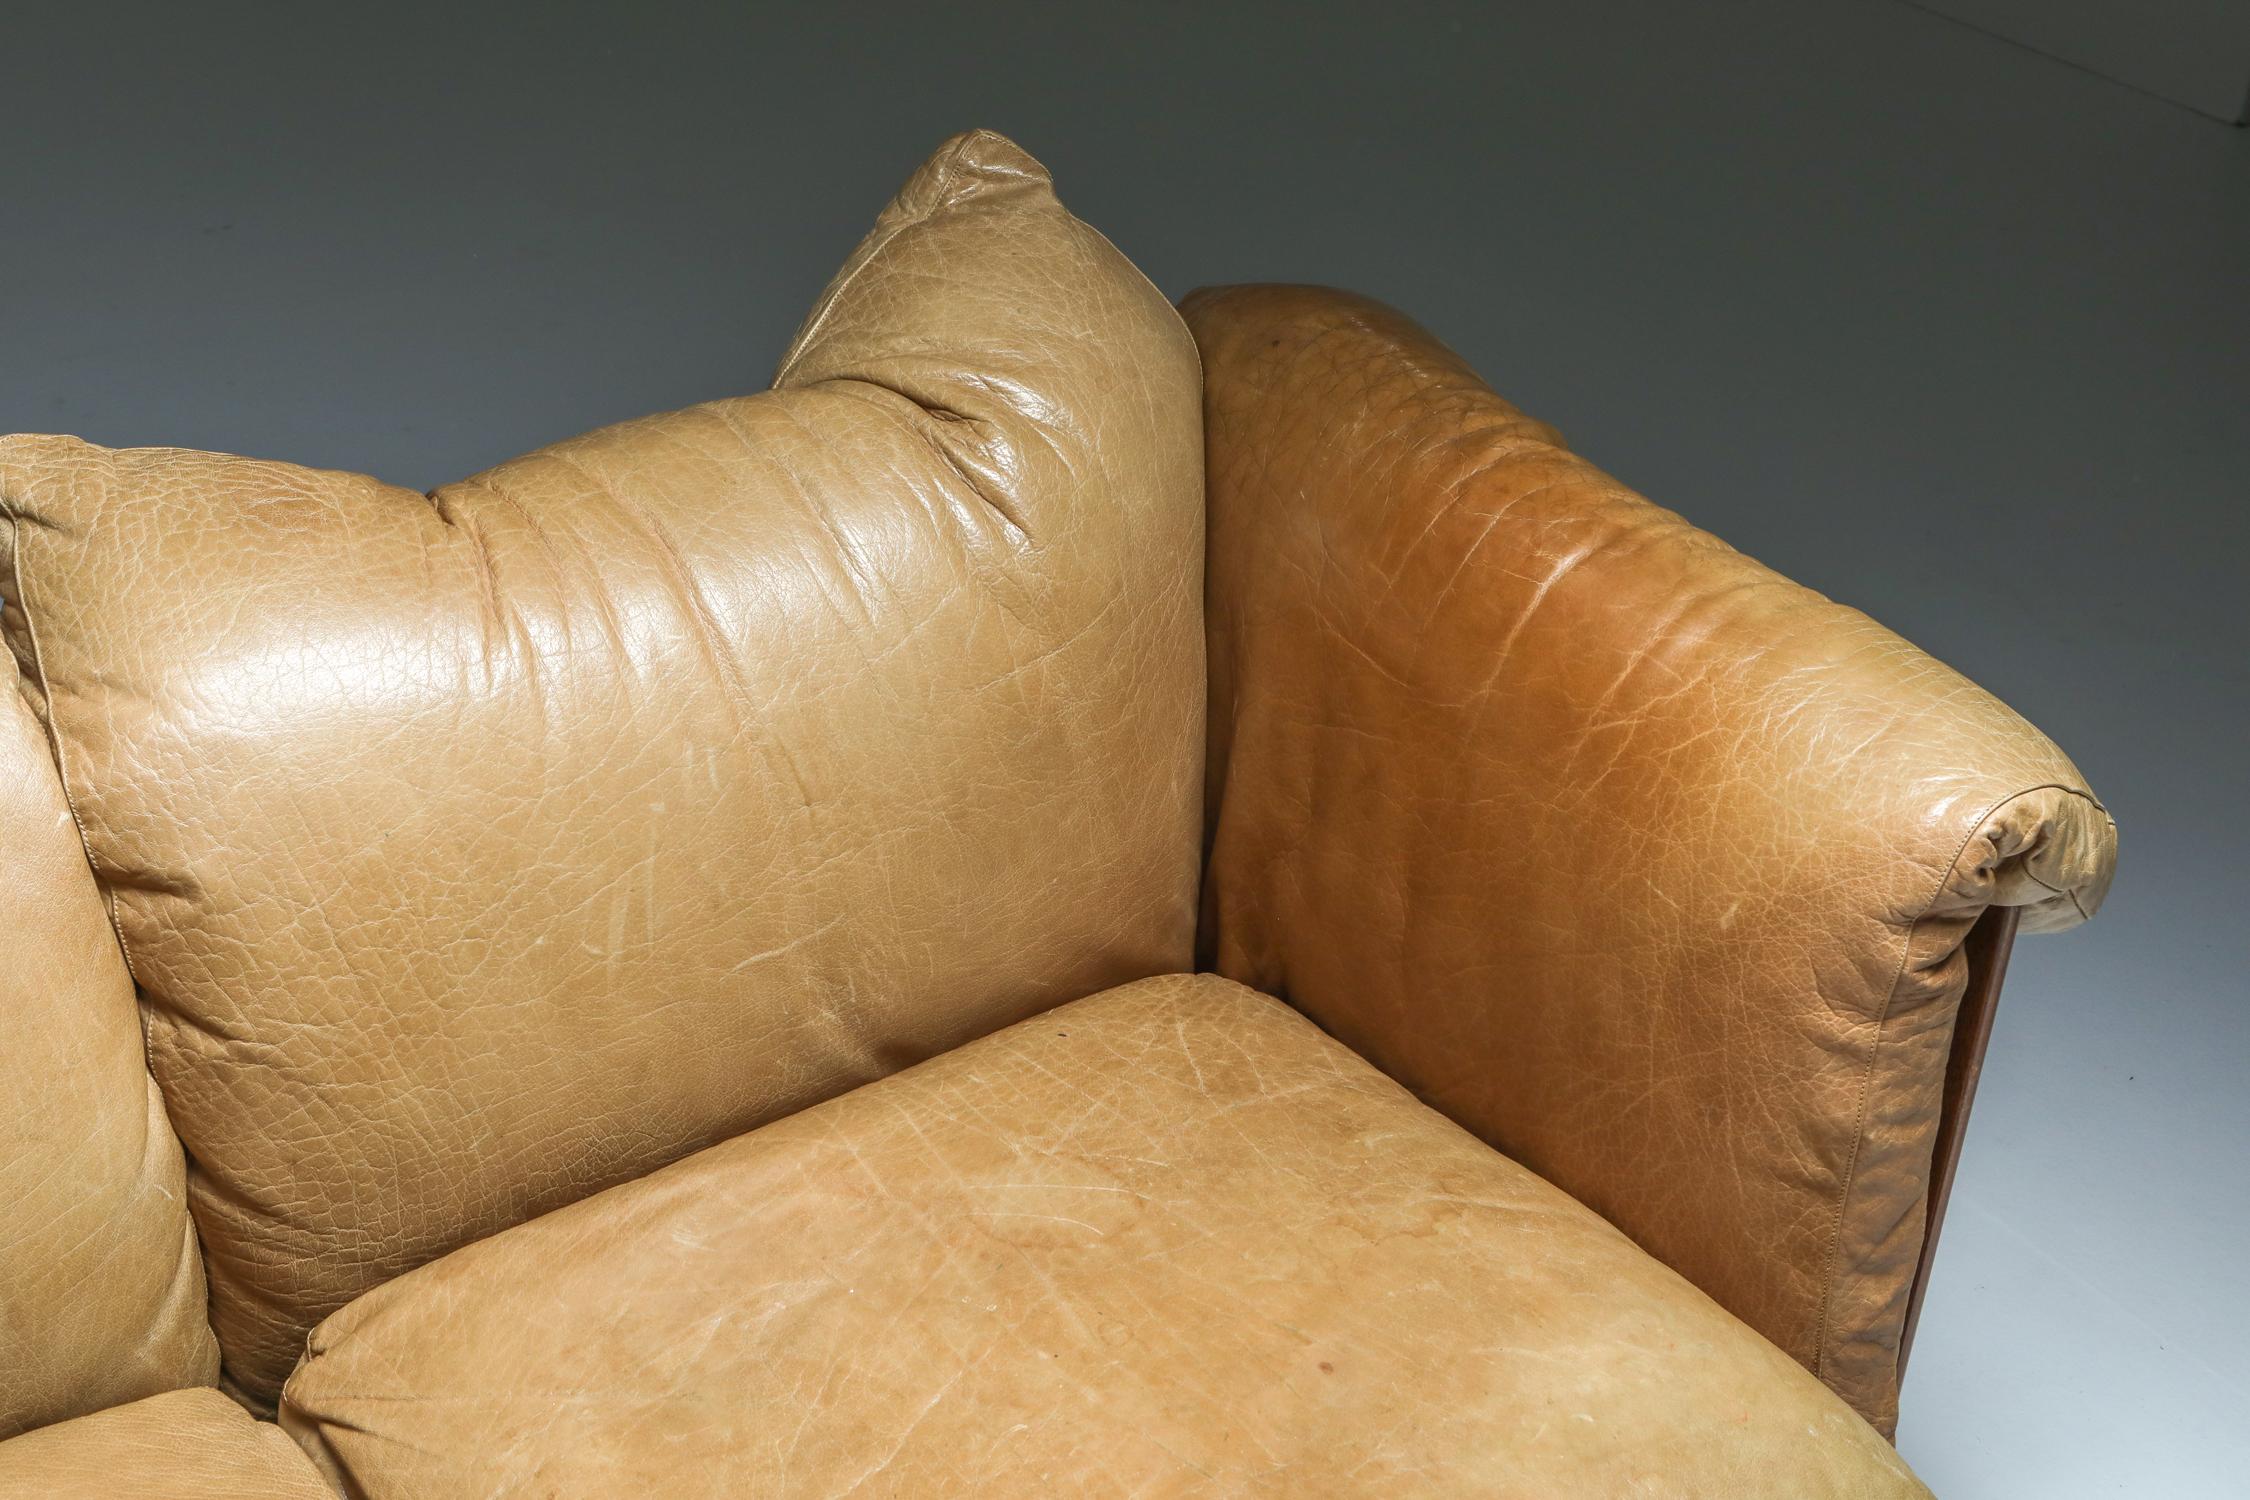 Mid-Century Modern couch, camel leather, walnut, De Pas, D'Urbino & Lomazzi, Padova, Italy

Comfortable and gorgeous seating piece by these Italian masters. The patina of the leather is just how we like it to be. All cushions in great shape, no